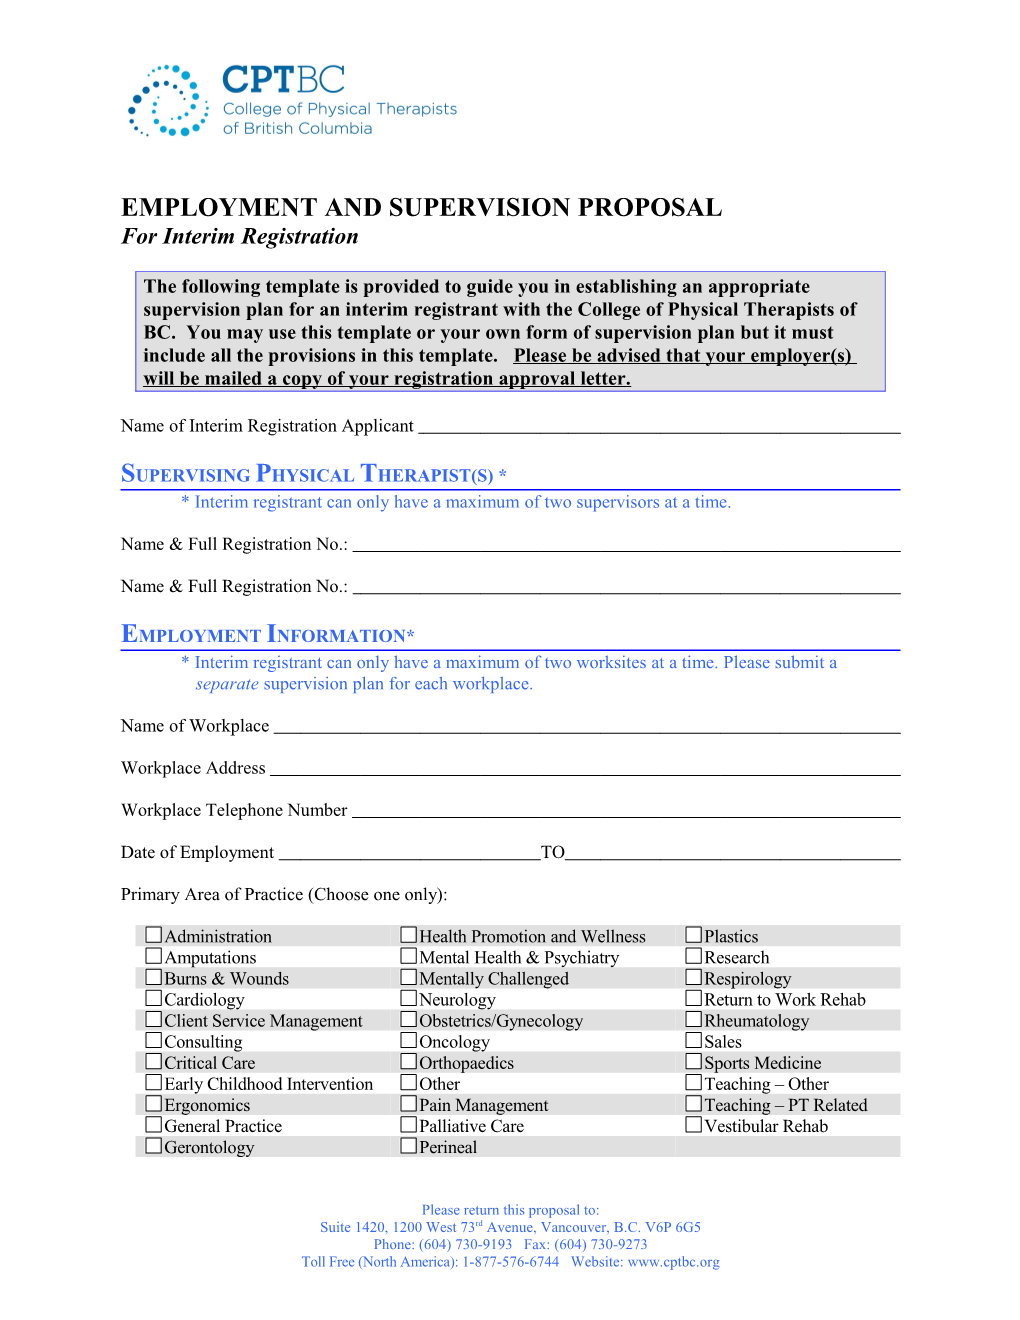 Employment and Supervision Proposal